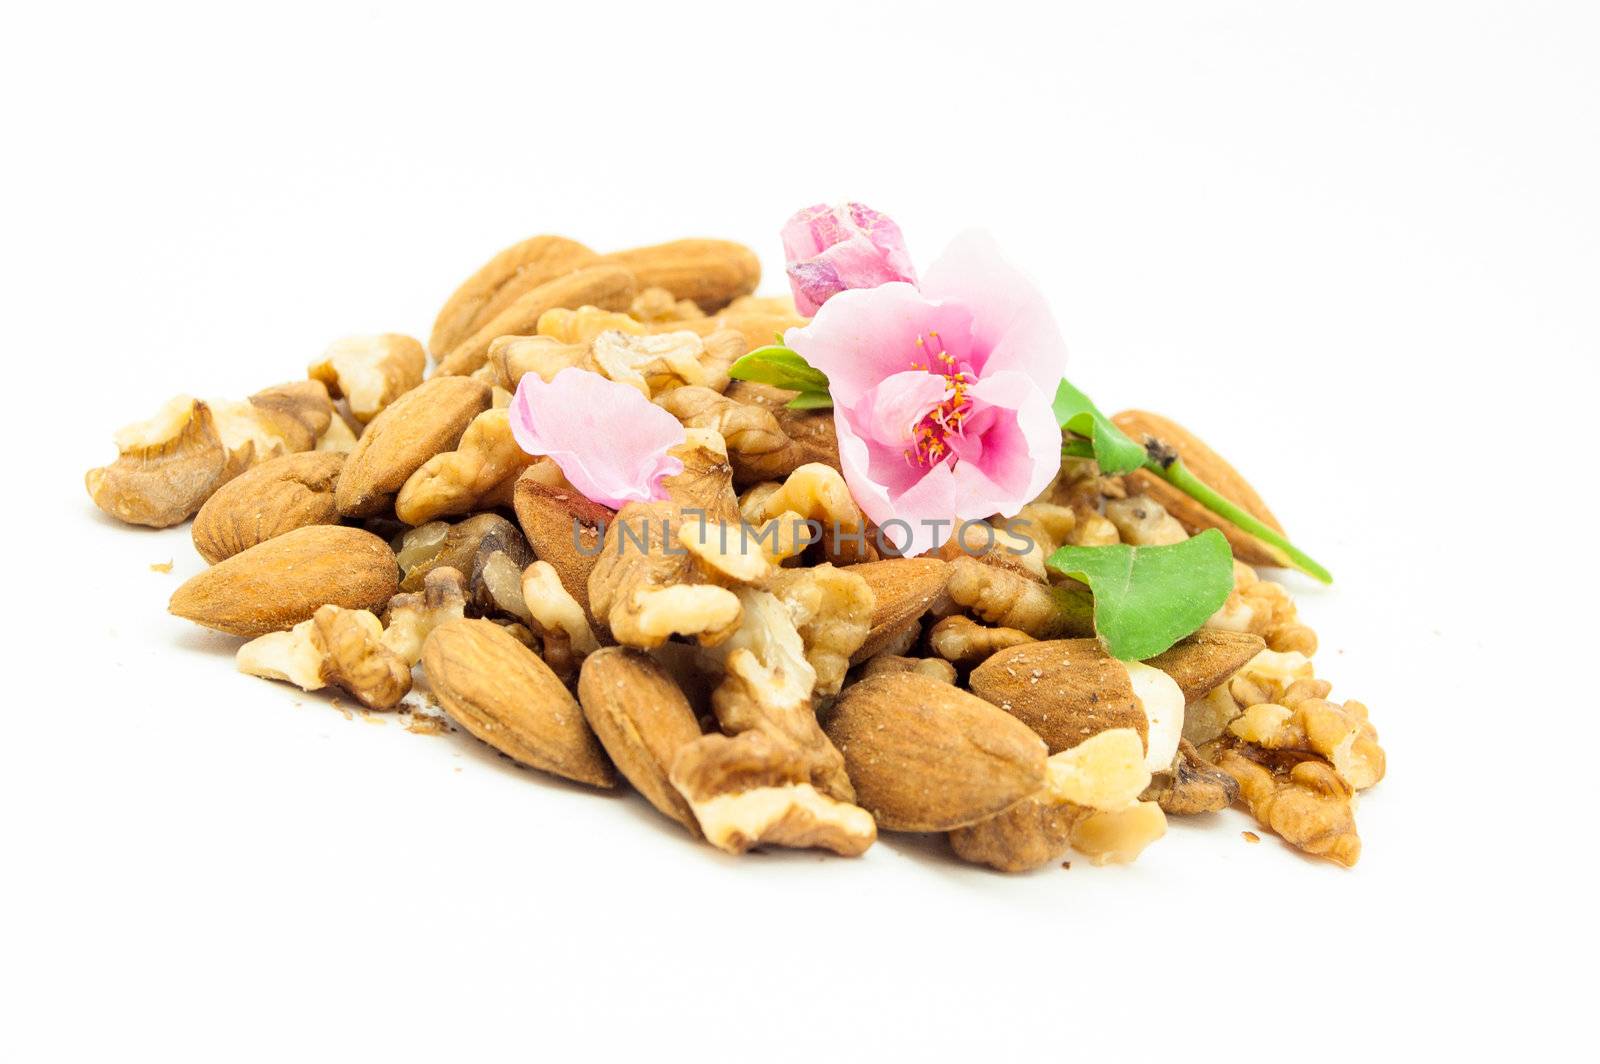 Almonds and nuts by saap585